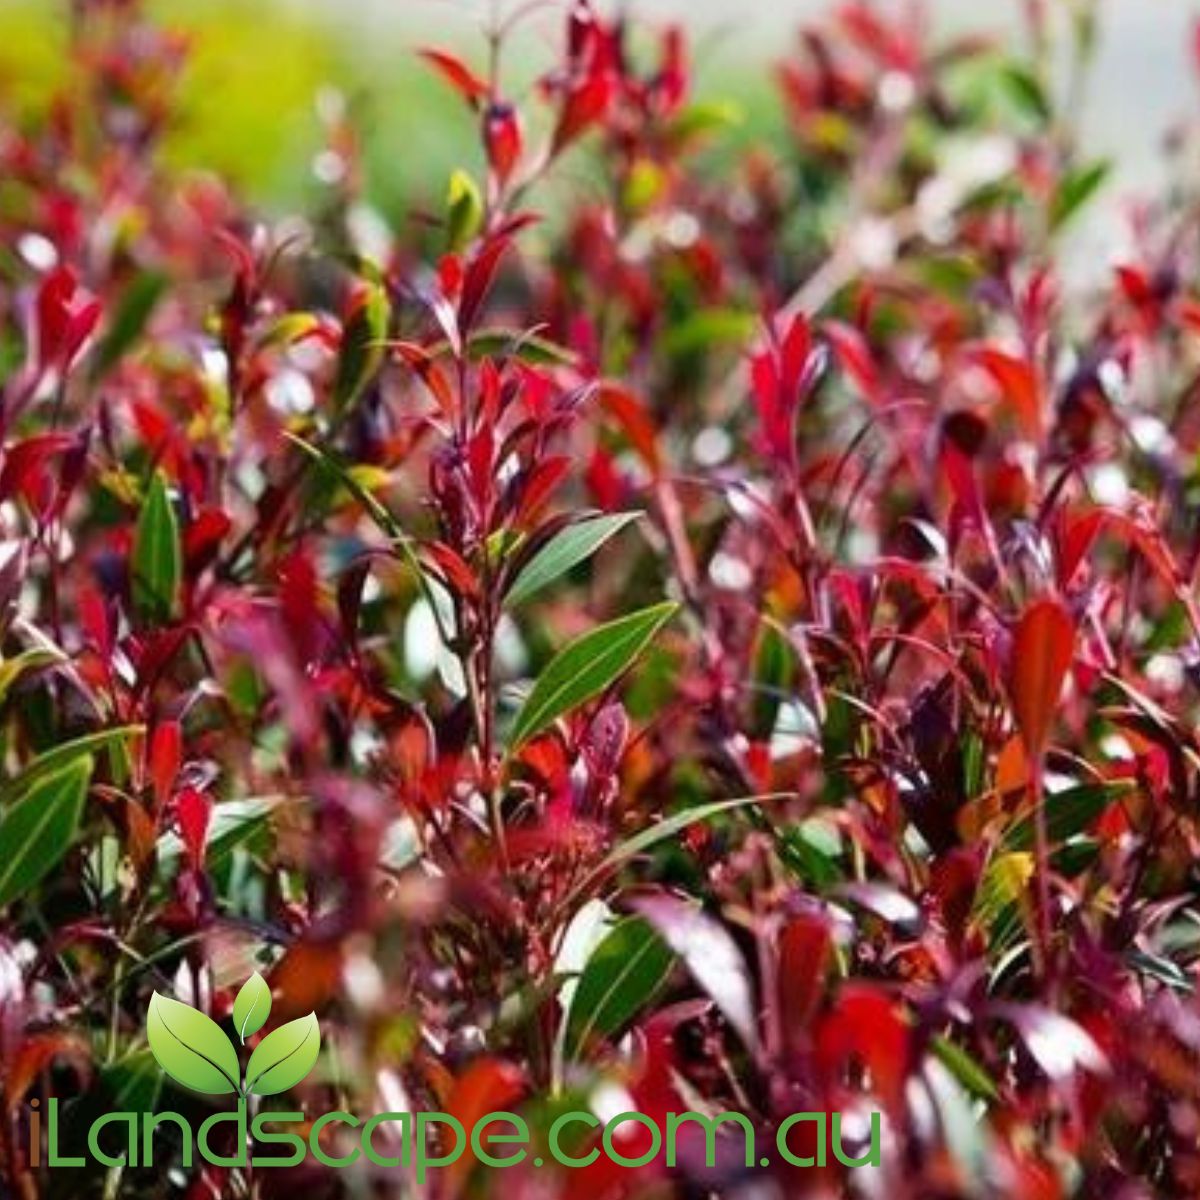 Acmena Forest flame is a slender hedge plant that produces beautiful deep red new growth before maturing back to dark green foliage